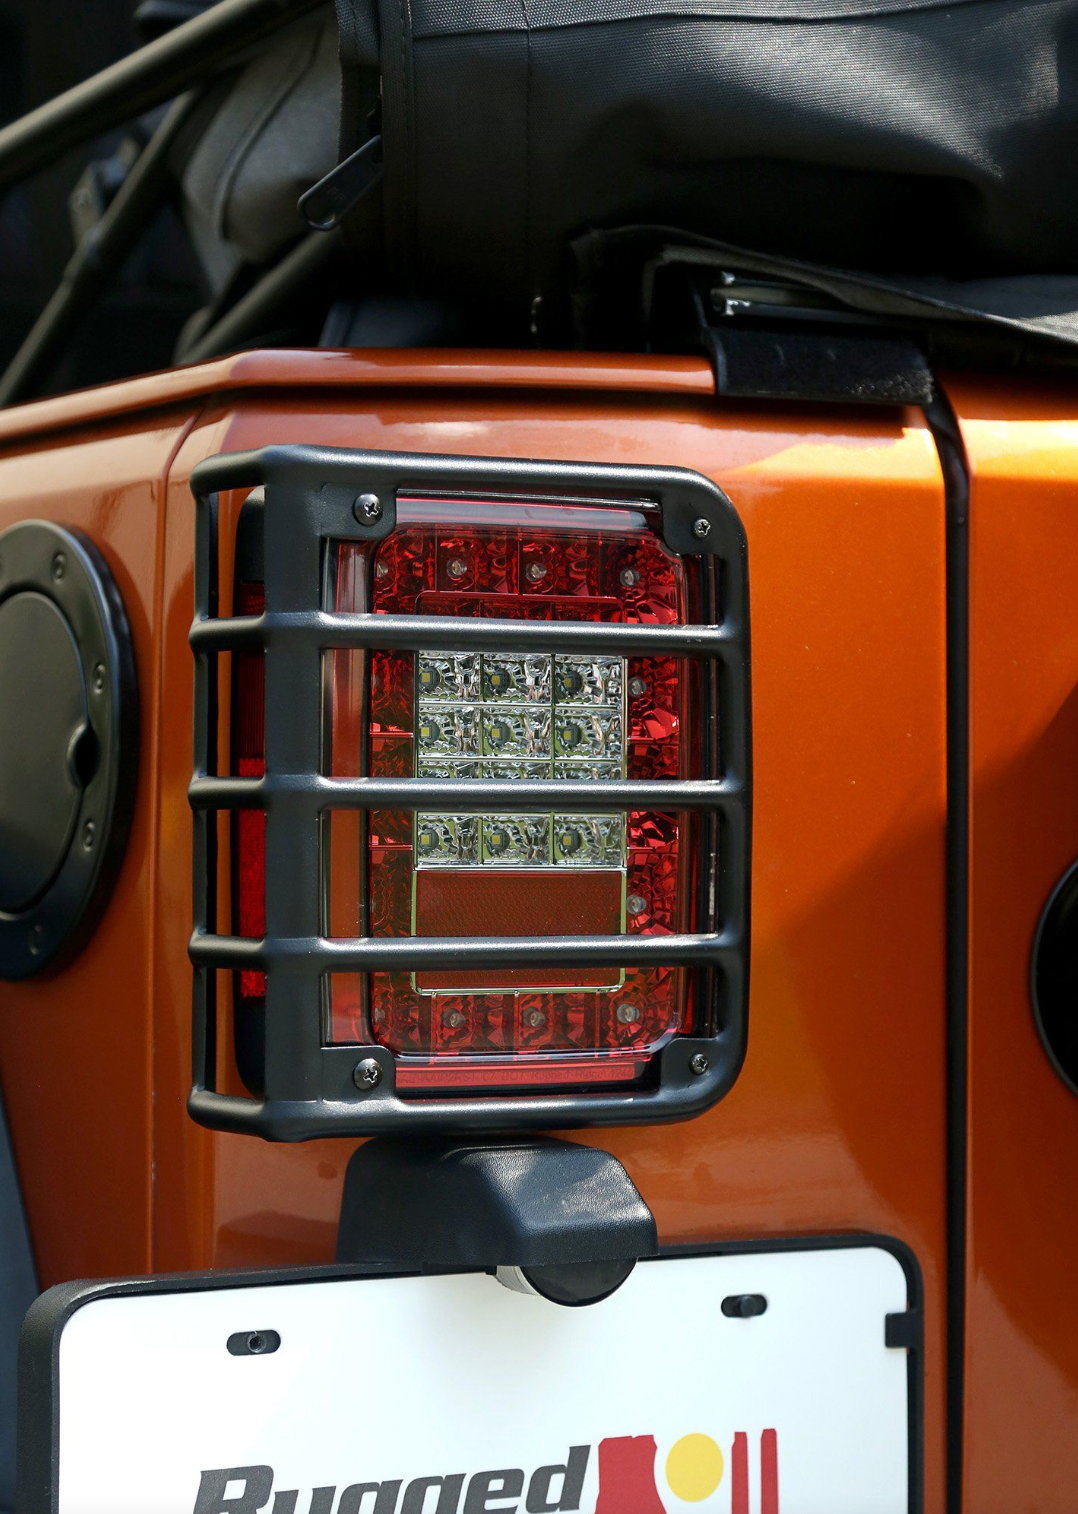 Rugged Ridge  Textured Black Metal Tail Light Guards Covers for Jeep Wrangler JK 2007 -2018